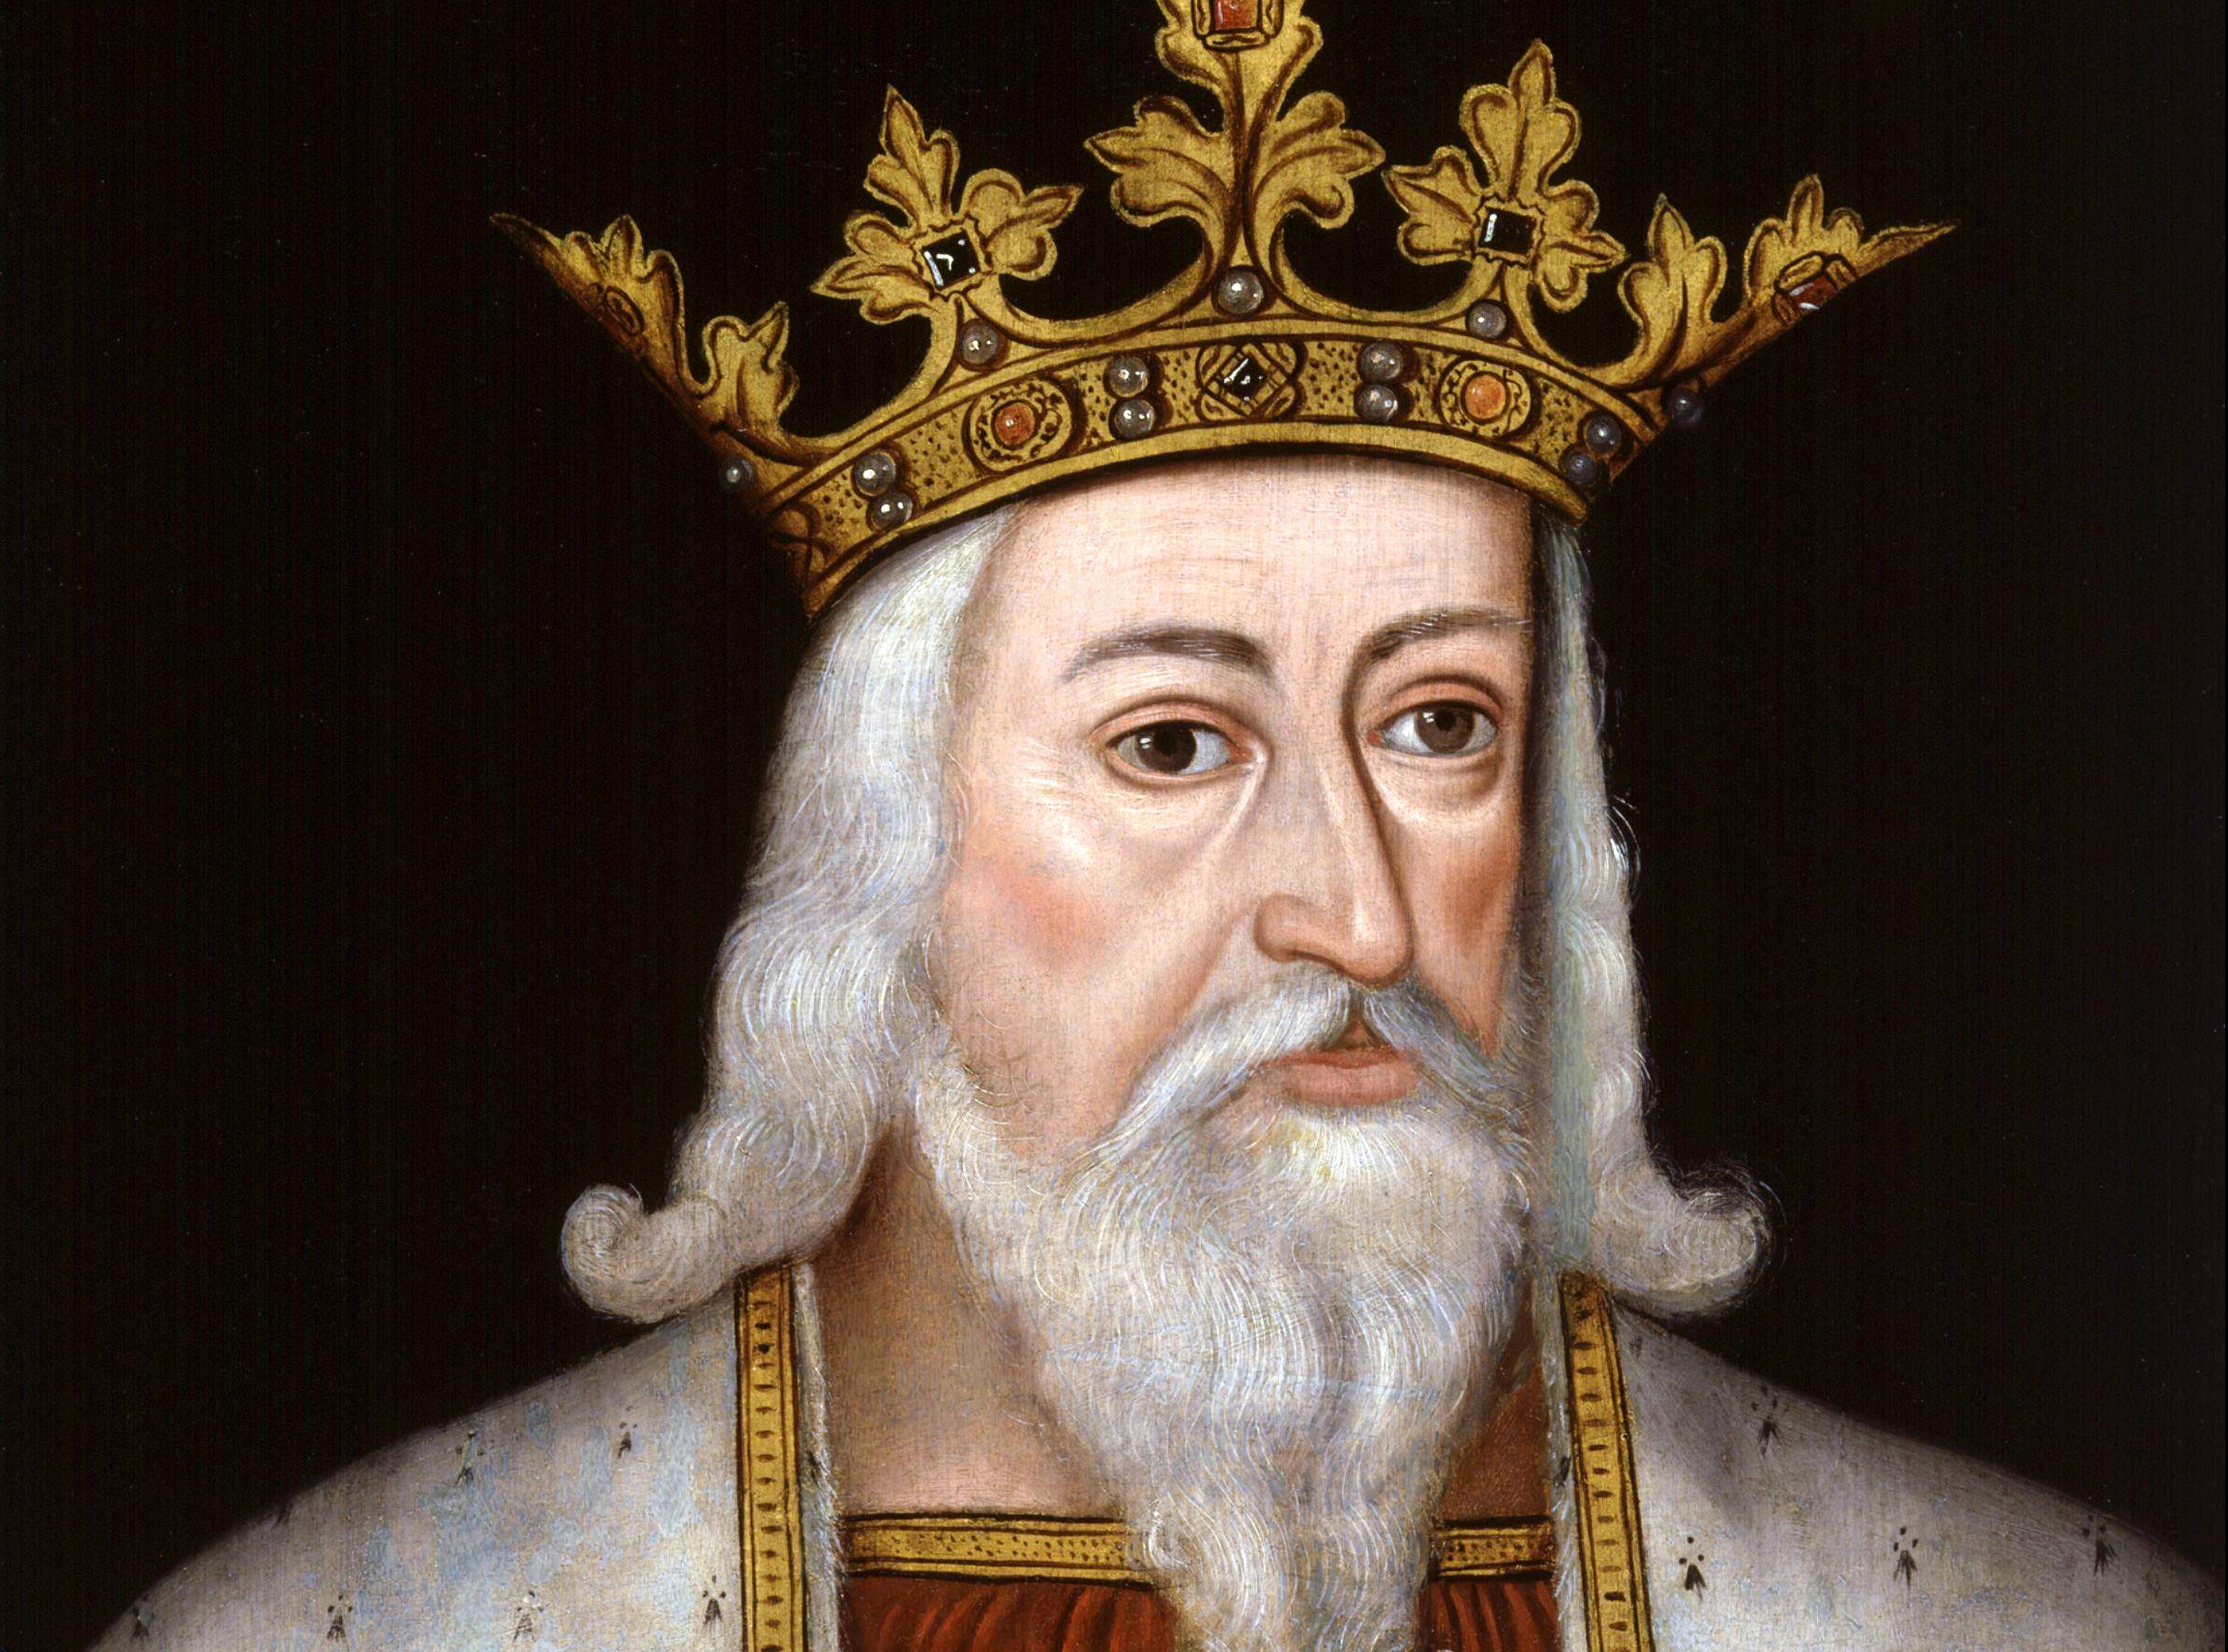 Edward III 13 November 1312 21 June 1377 was King of England from 25 January 1327 until his death he is noted for his military success and for restoring royal authority after the disastrous and unorthodox reign of his father, Edward II. Edward III transformed the Kingdom of England into one of the most formidable military powers in Europe.br/br/ His long reign of fifty years was the second longest in medieval England and saw vital developments in legislation and government in particular the evolution of the English parliament as well as the ravages of the Black Death. England: King Edward III of England r. 1327 - 1377, oil on panel, anonymous, c. 1598 xSupplier:xCPAxMediaxCo.xLtd.x Copyright: xx